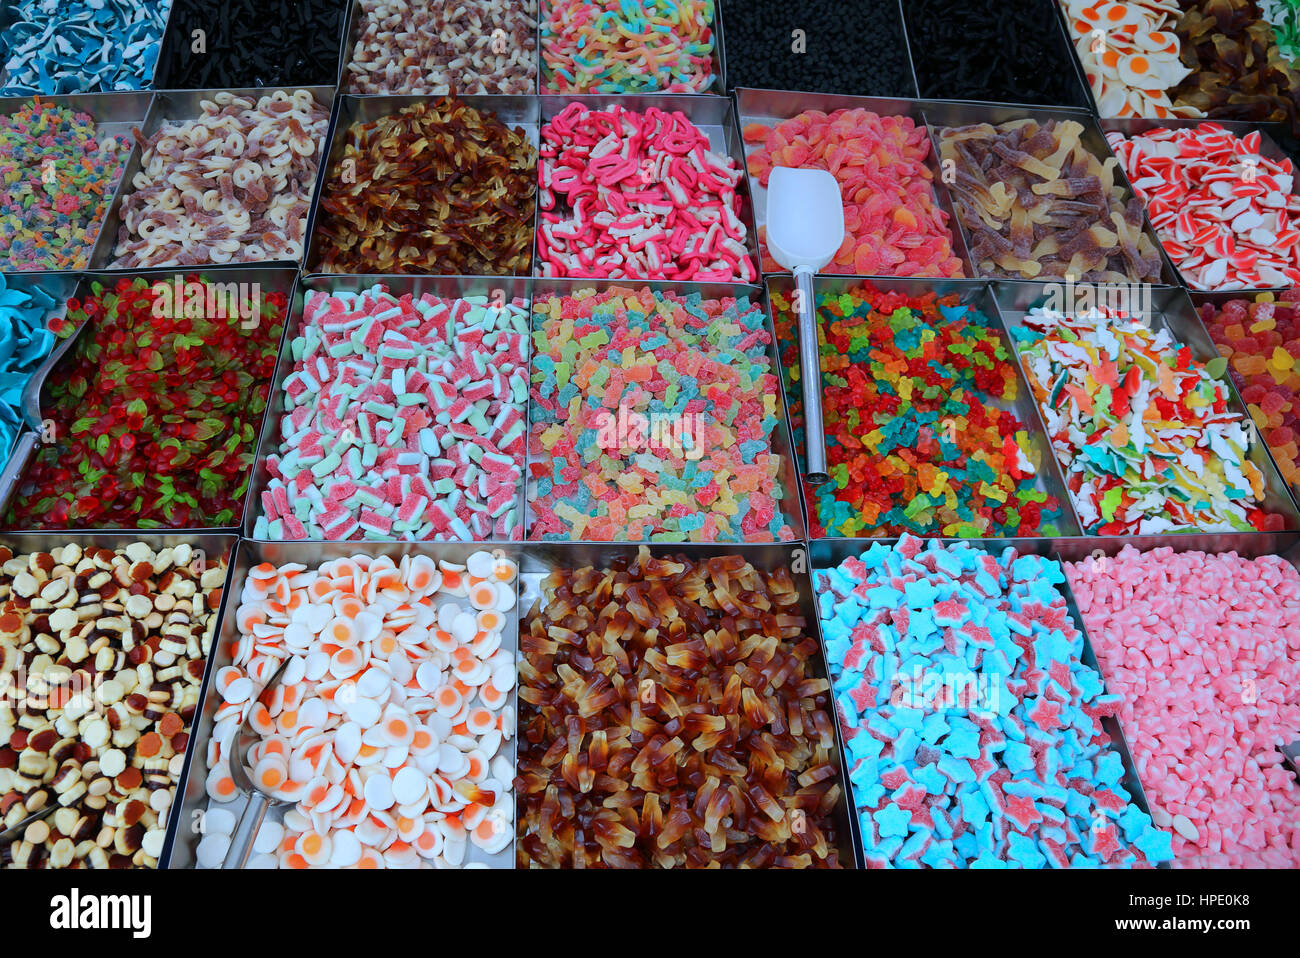 sugar candy on sale in market stall during the village festival Stock Photo